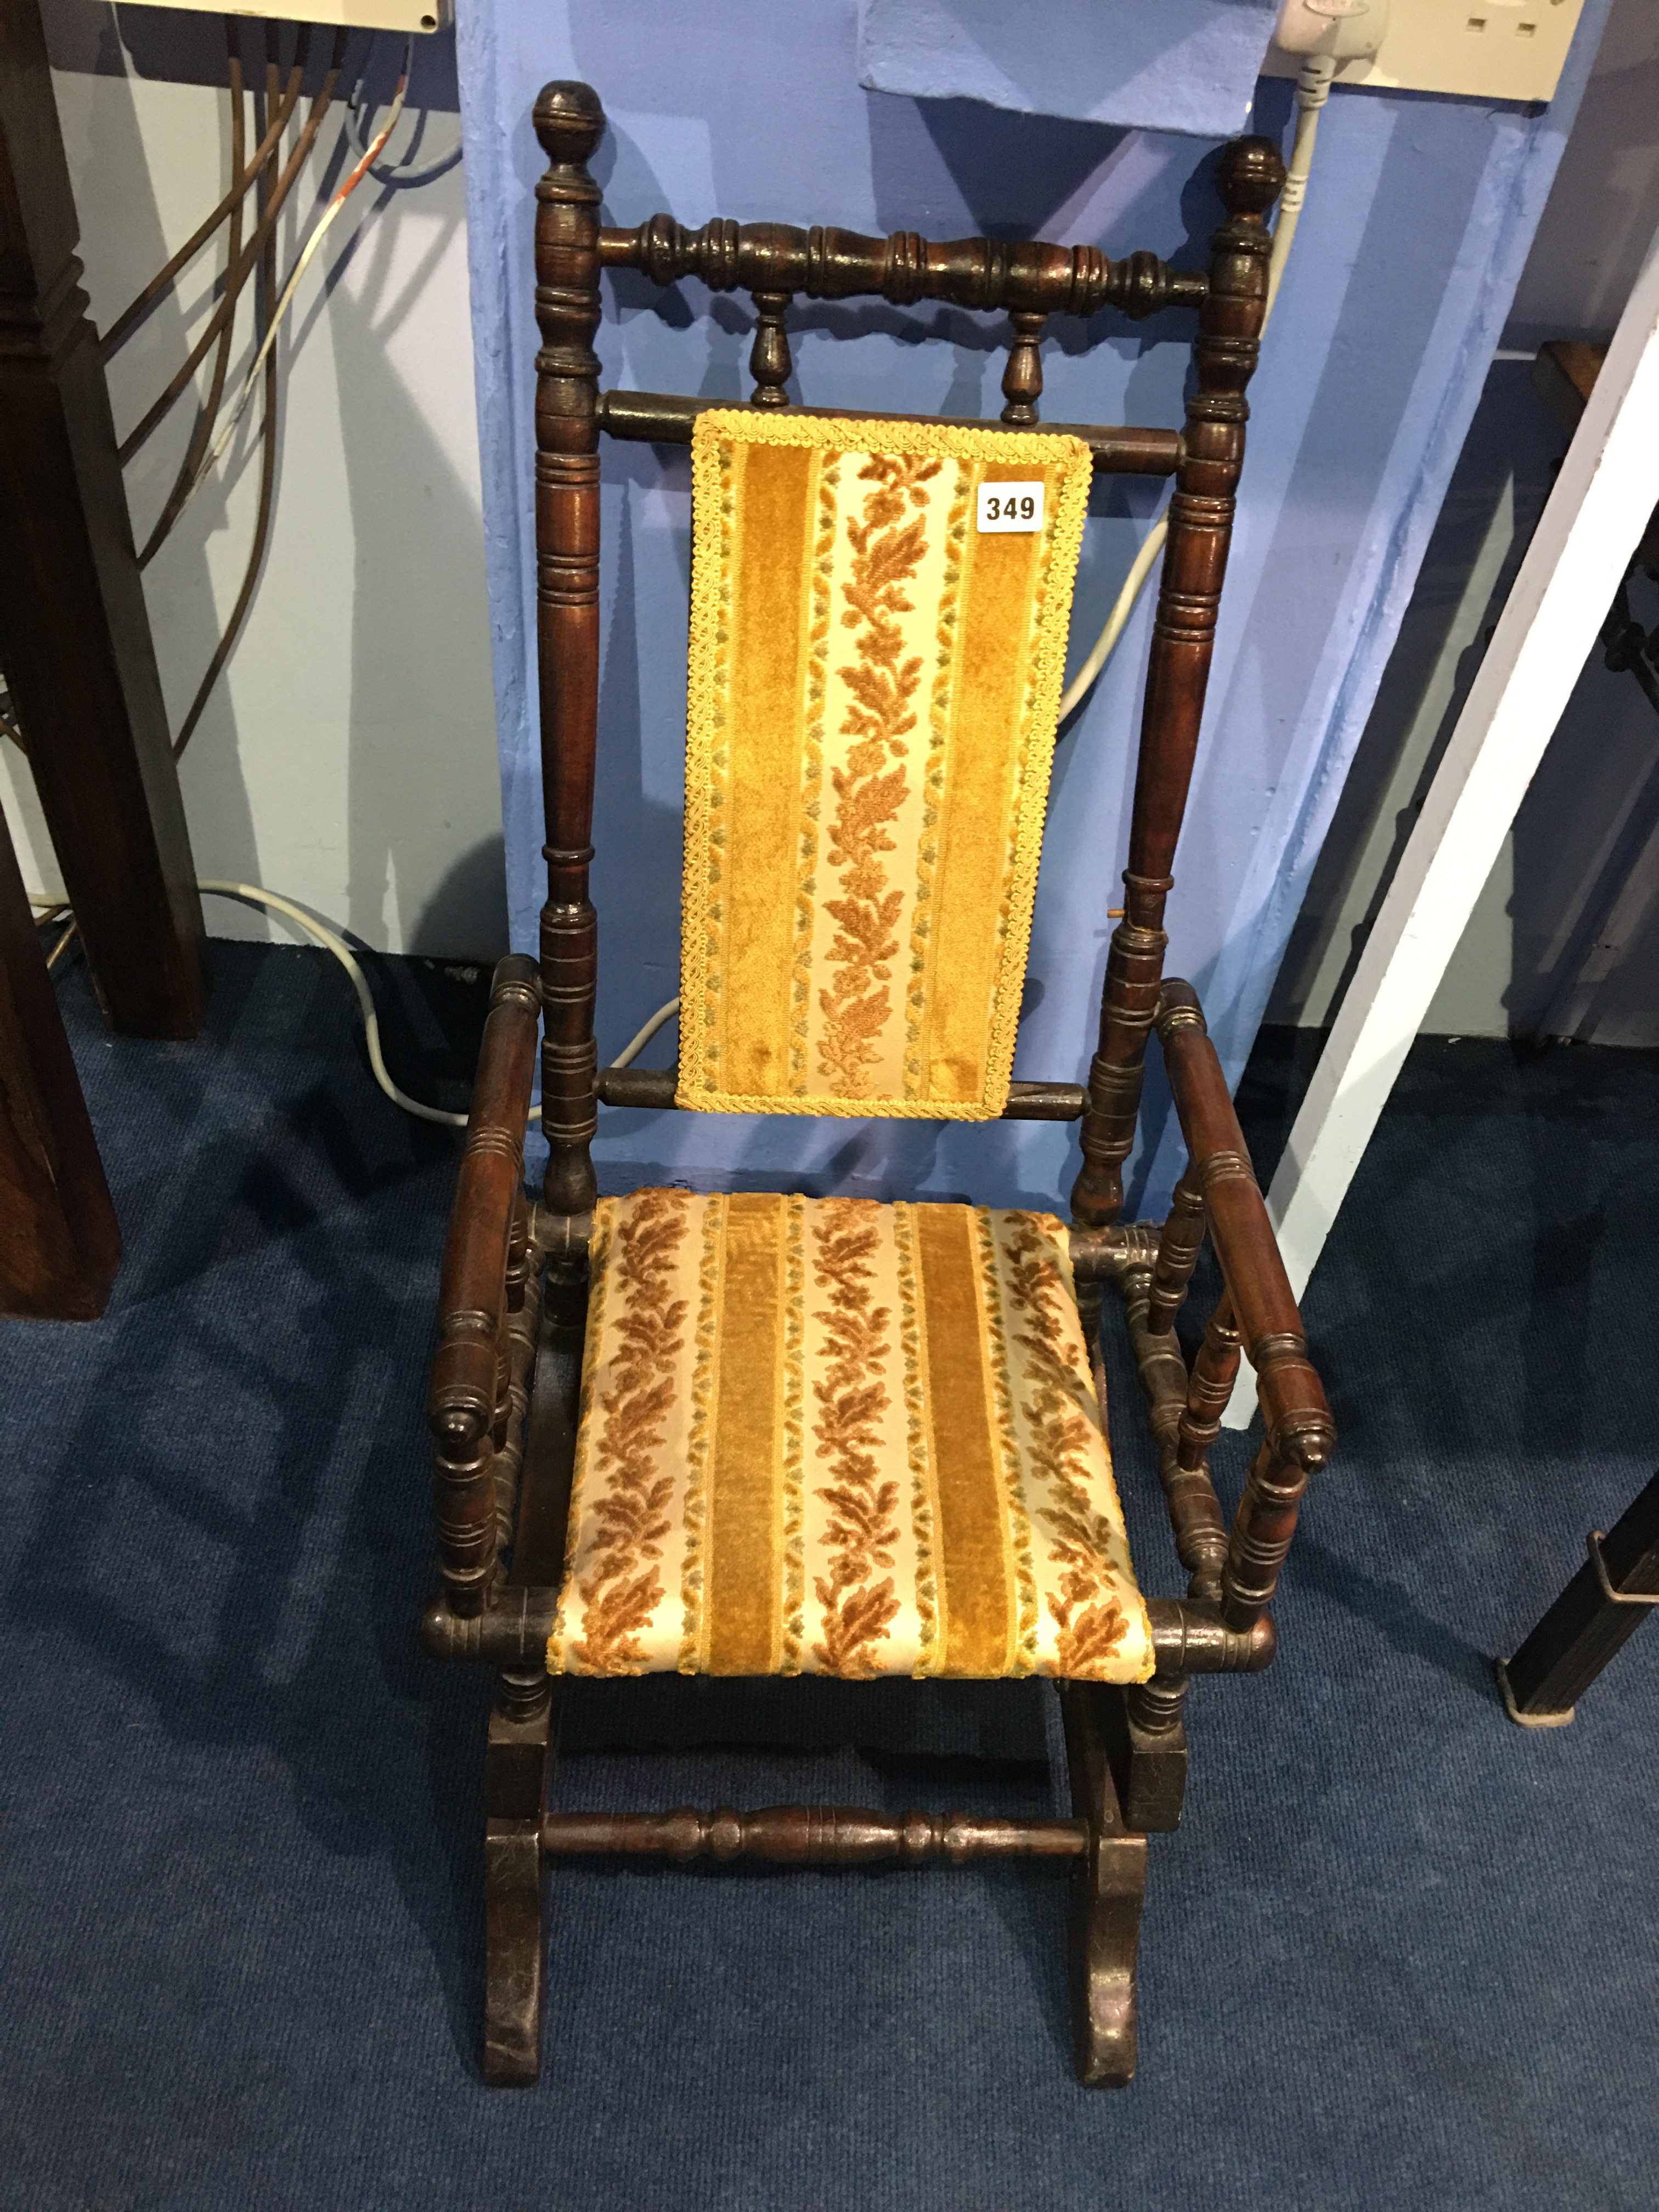 A child's American rocking chair